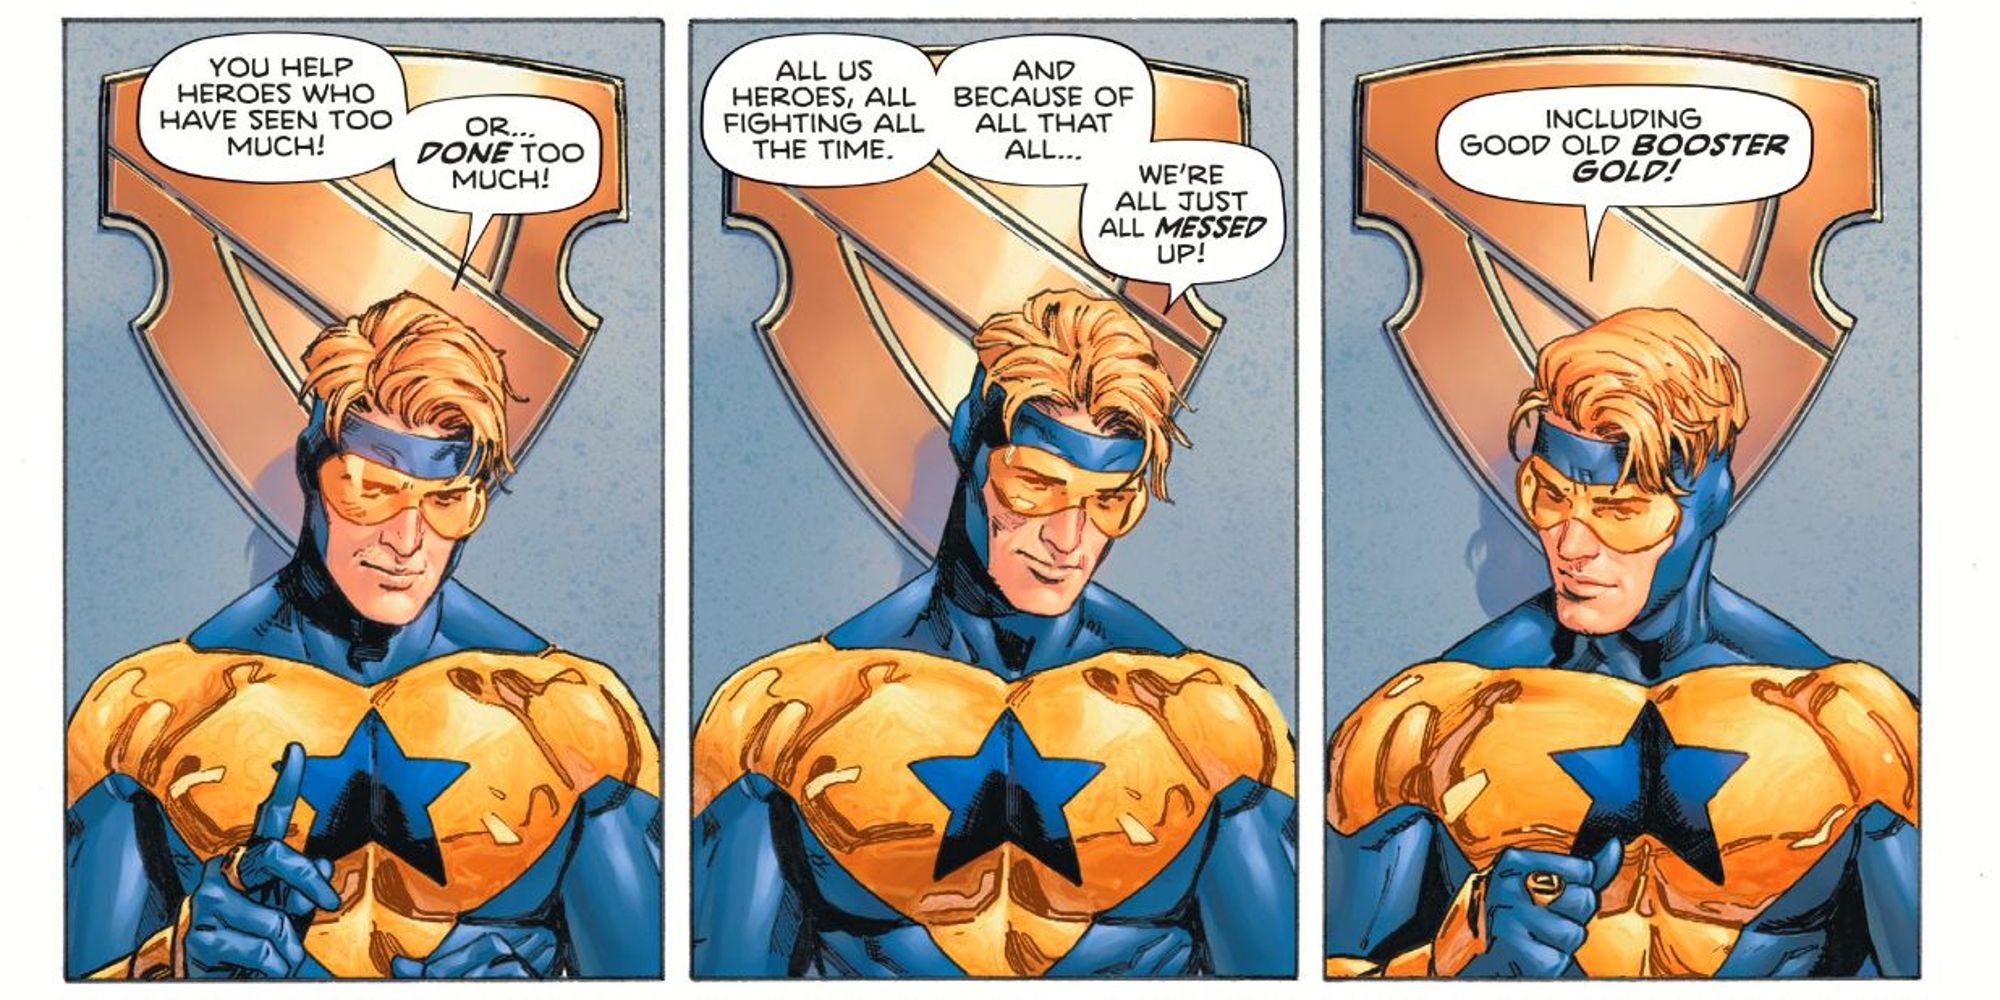 Booster Gold discussing the mental health of superheroes in DC Comics